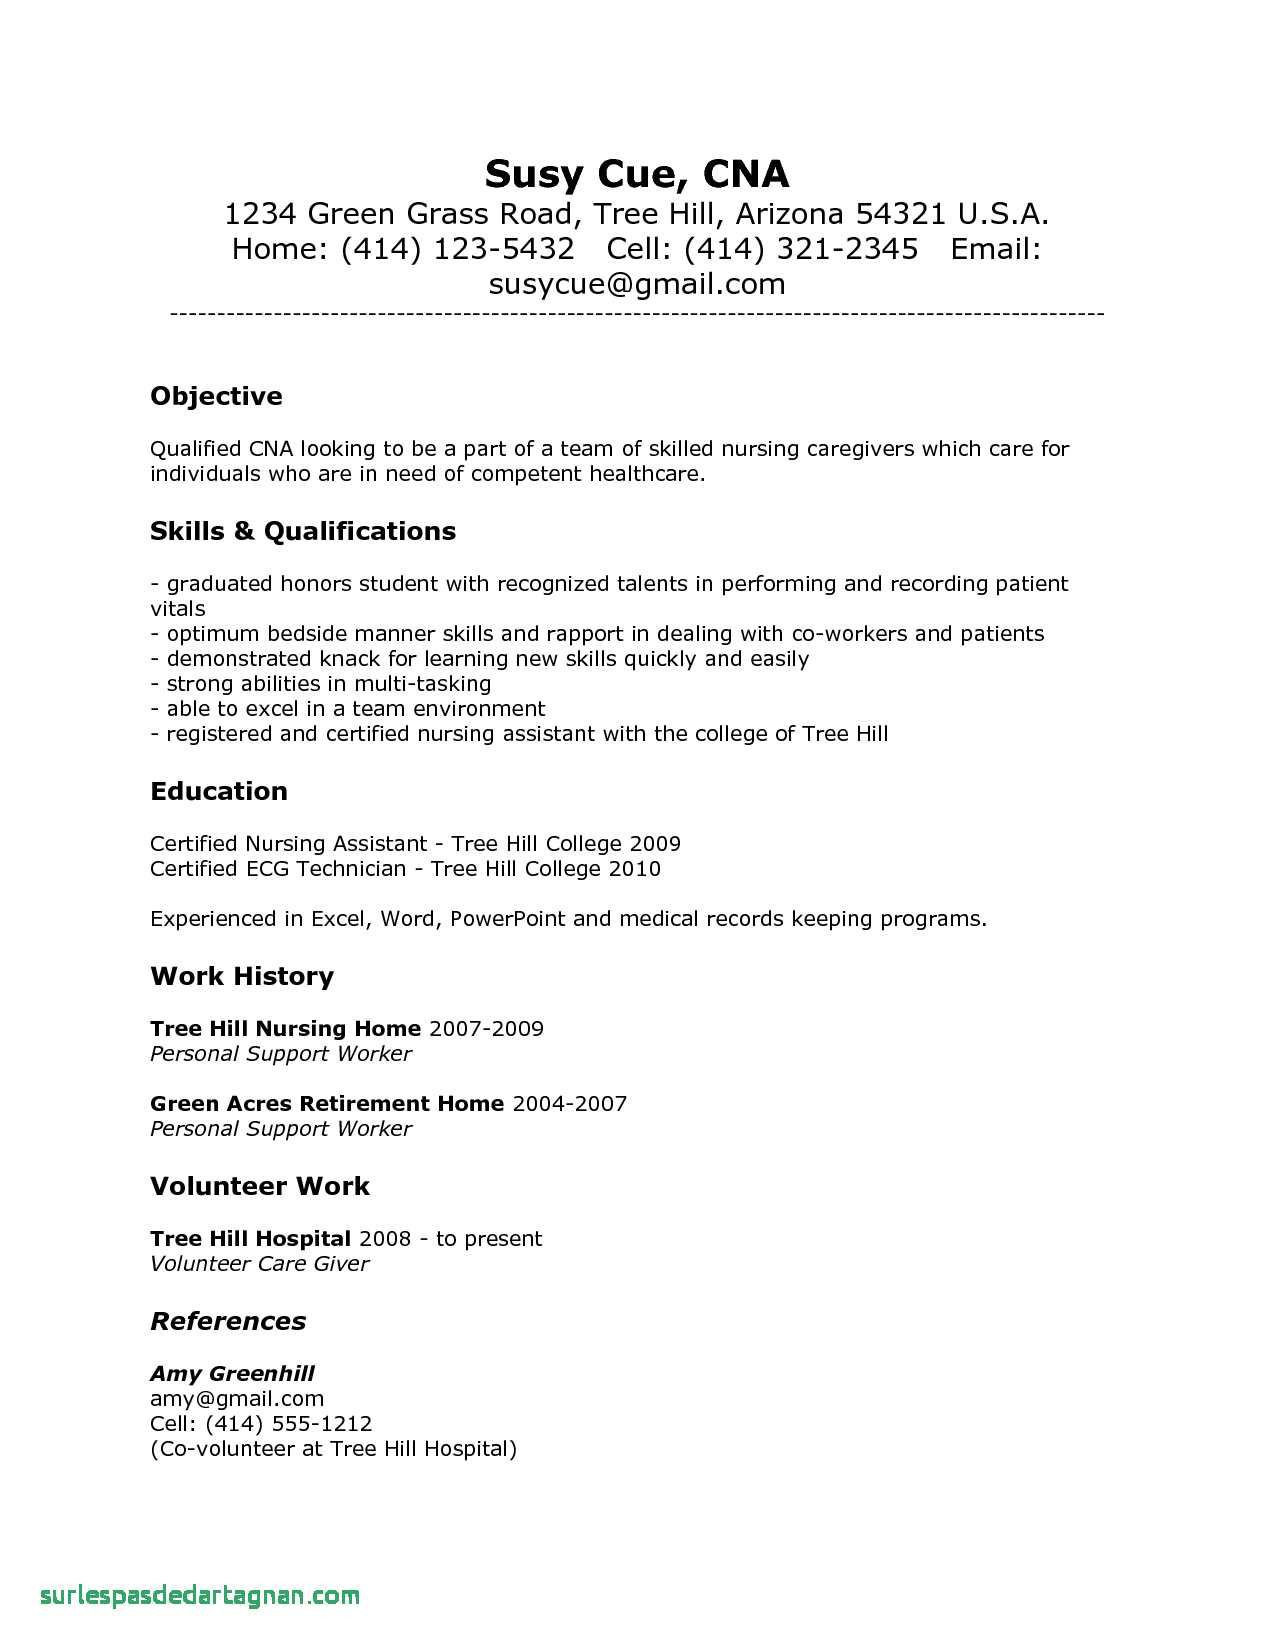 Resume Sample for Cna with No Experience Pin On Resume Templates